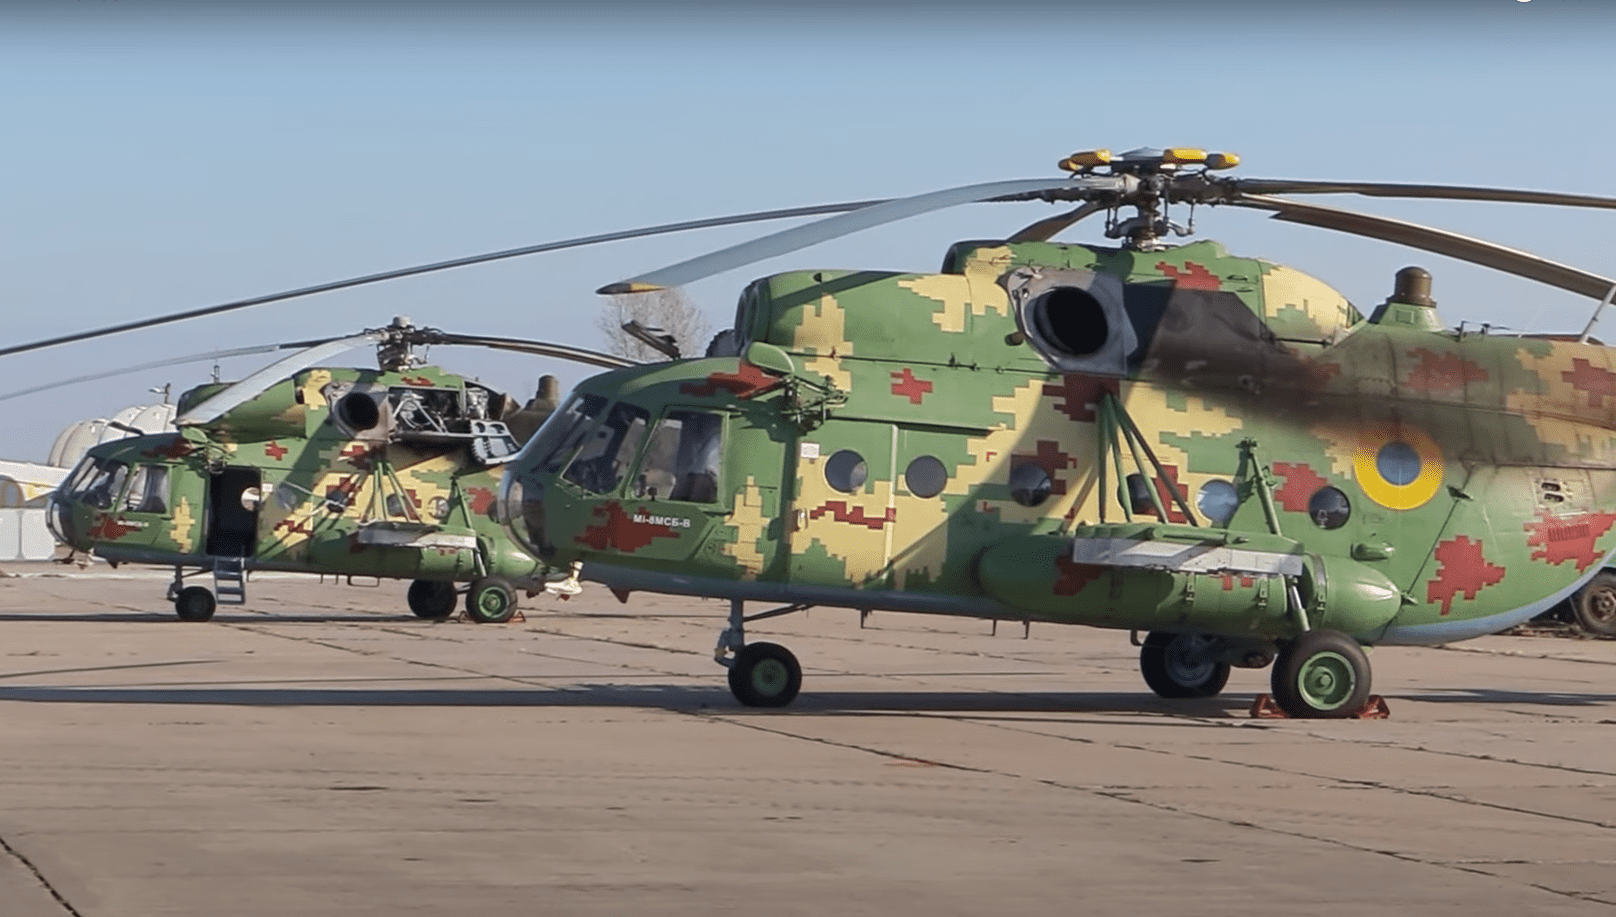 Lithuania announced a new military aid package for €125 million: Ukraine will receive Mi-8 helicopters and L-70 anti-aircraft guns